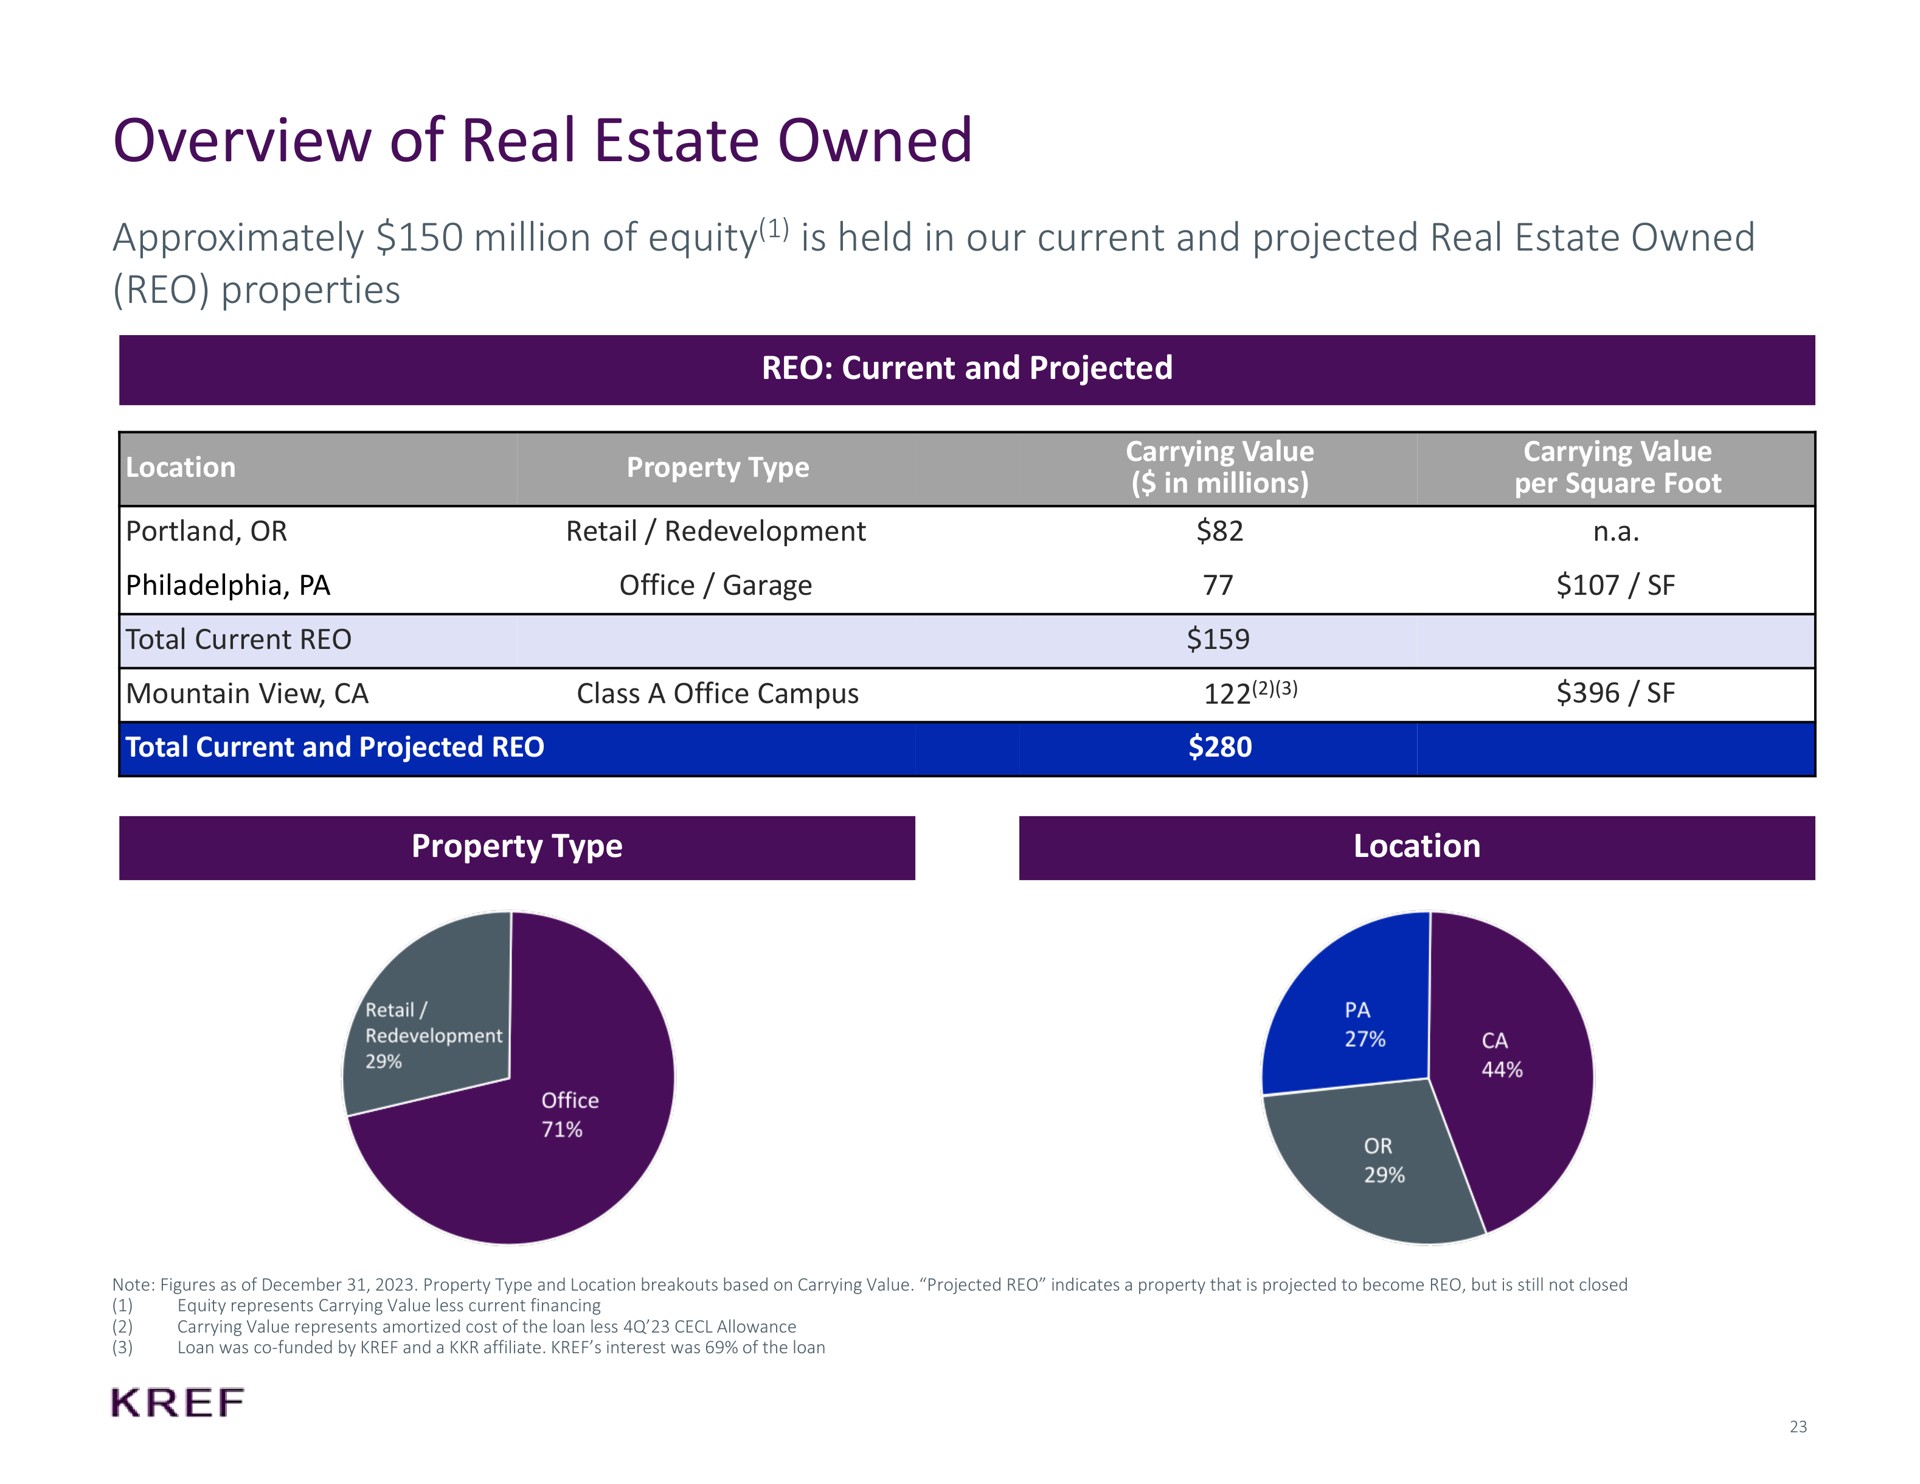 overview of real estate owned approximately million of equity is held in our current and projected real estate owned properties current and projected property type location | KKR Real Estate Finance Trust